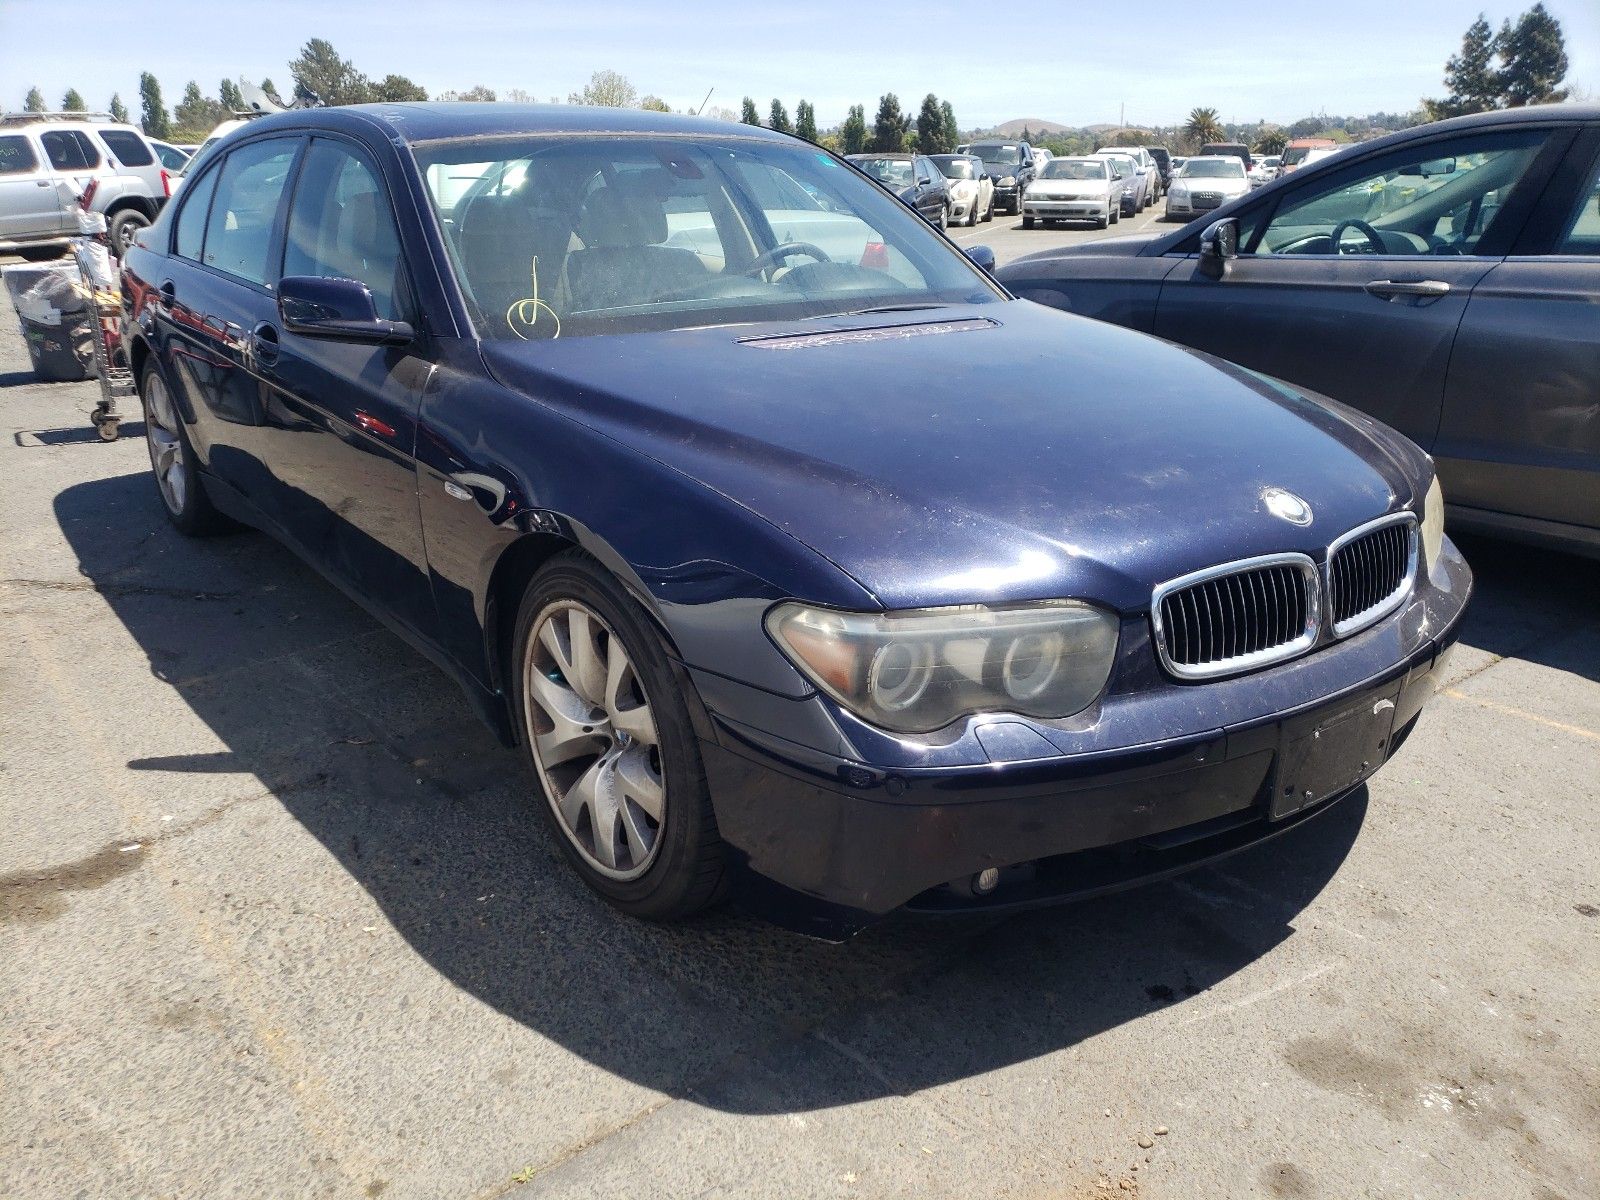 1 of WBAGN63575DS59723 BMW 7 Series 2005